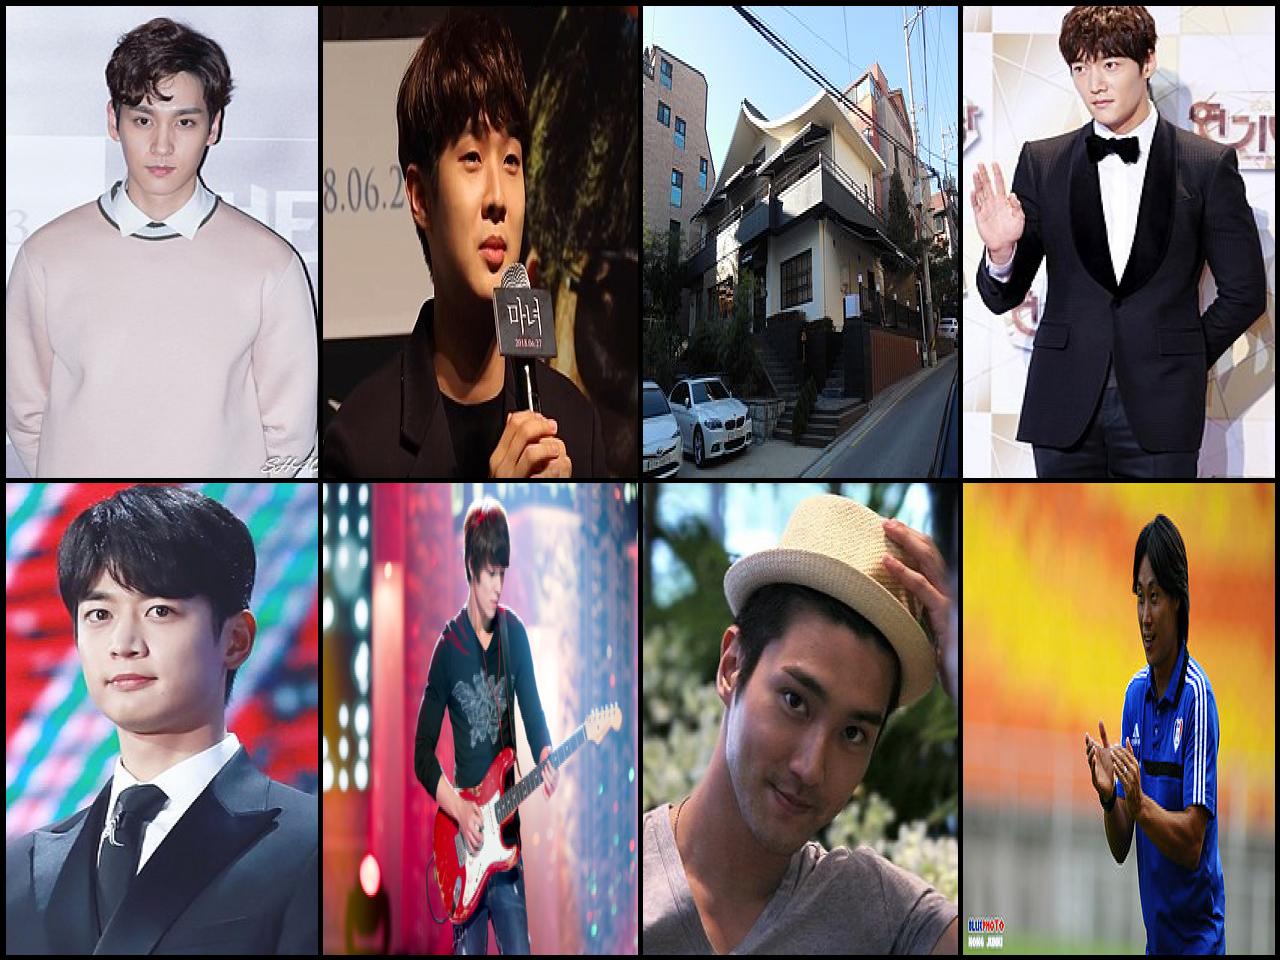 List of Famous people named <b>Choi</b>